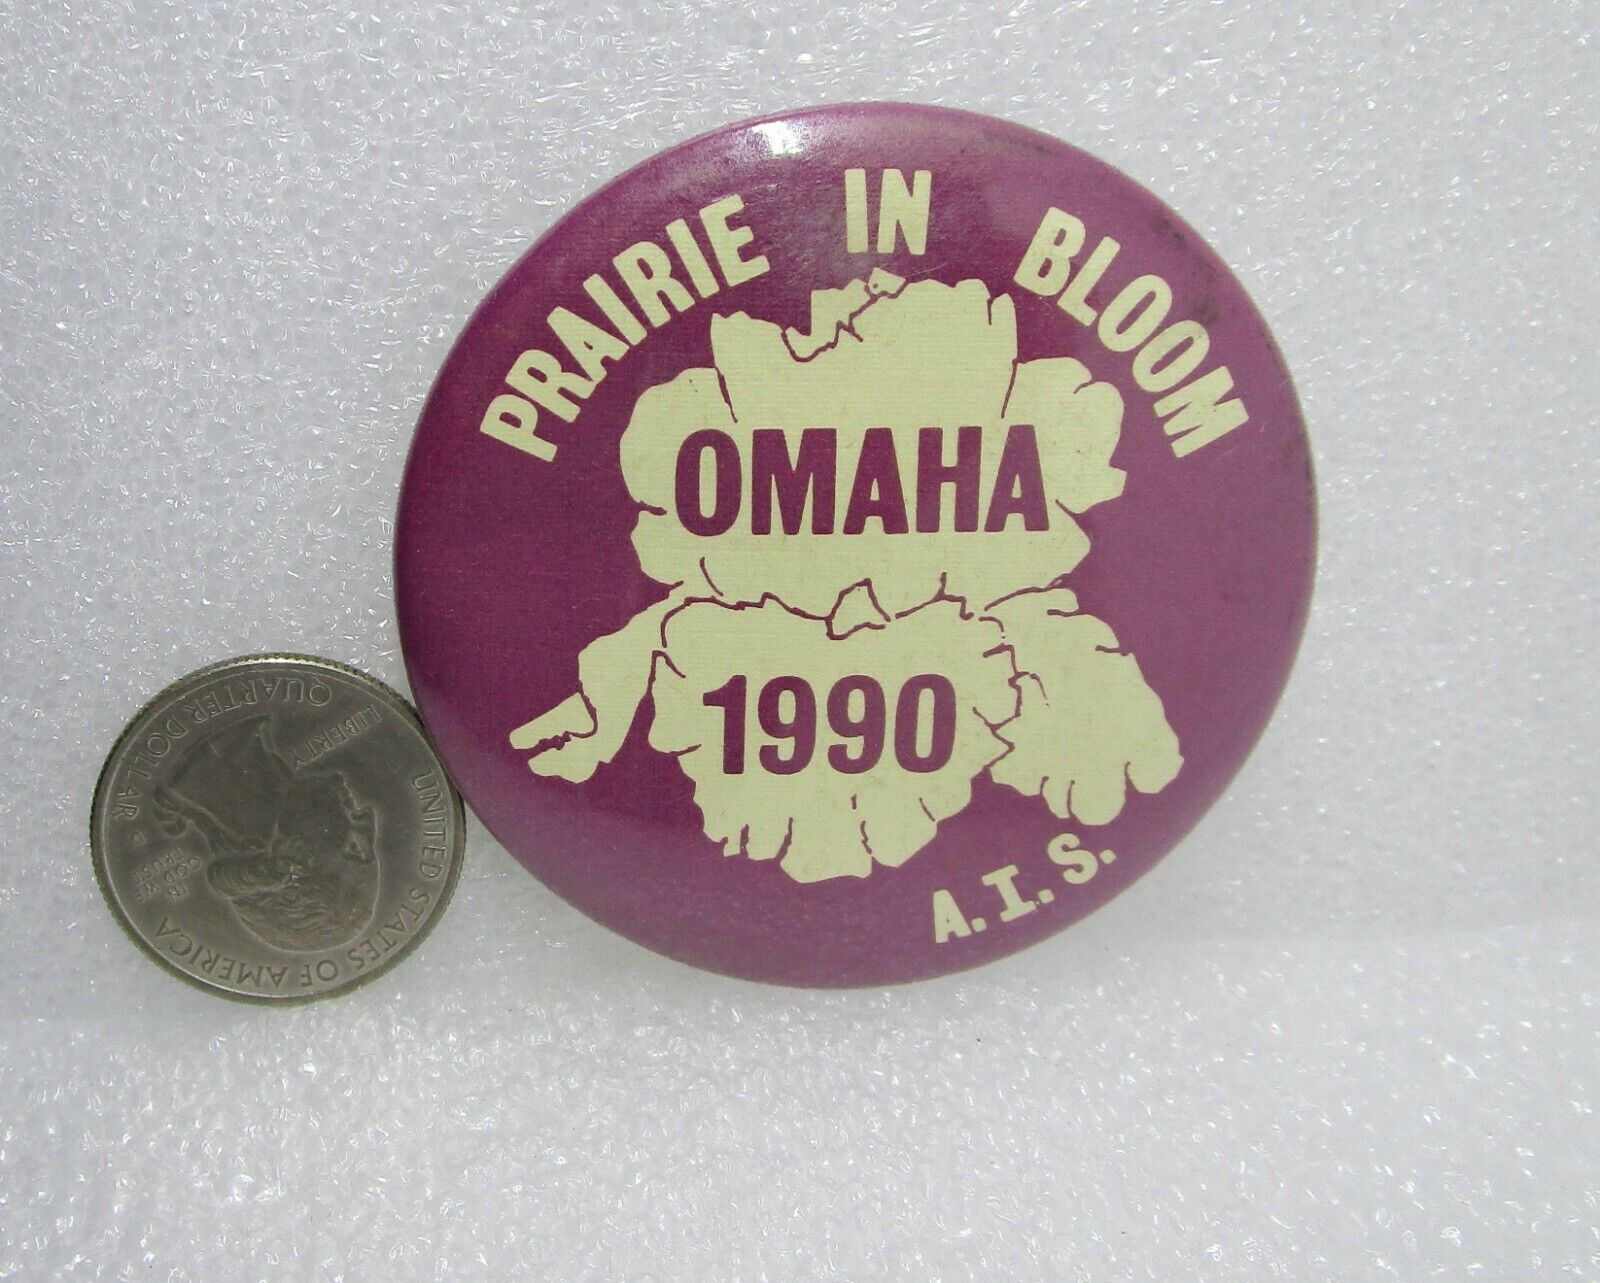 1990 Omaha Prairie In Bloom A.I.S. Button Pin